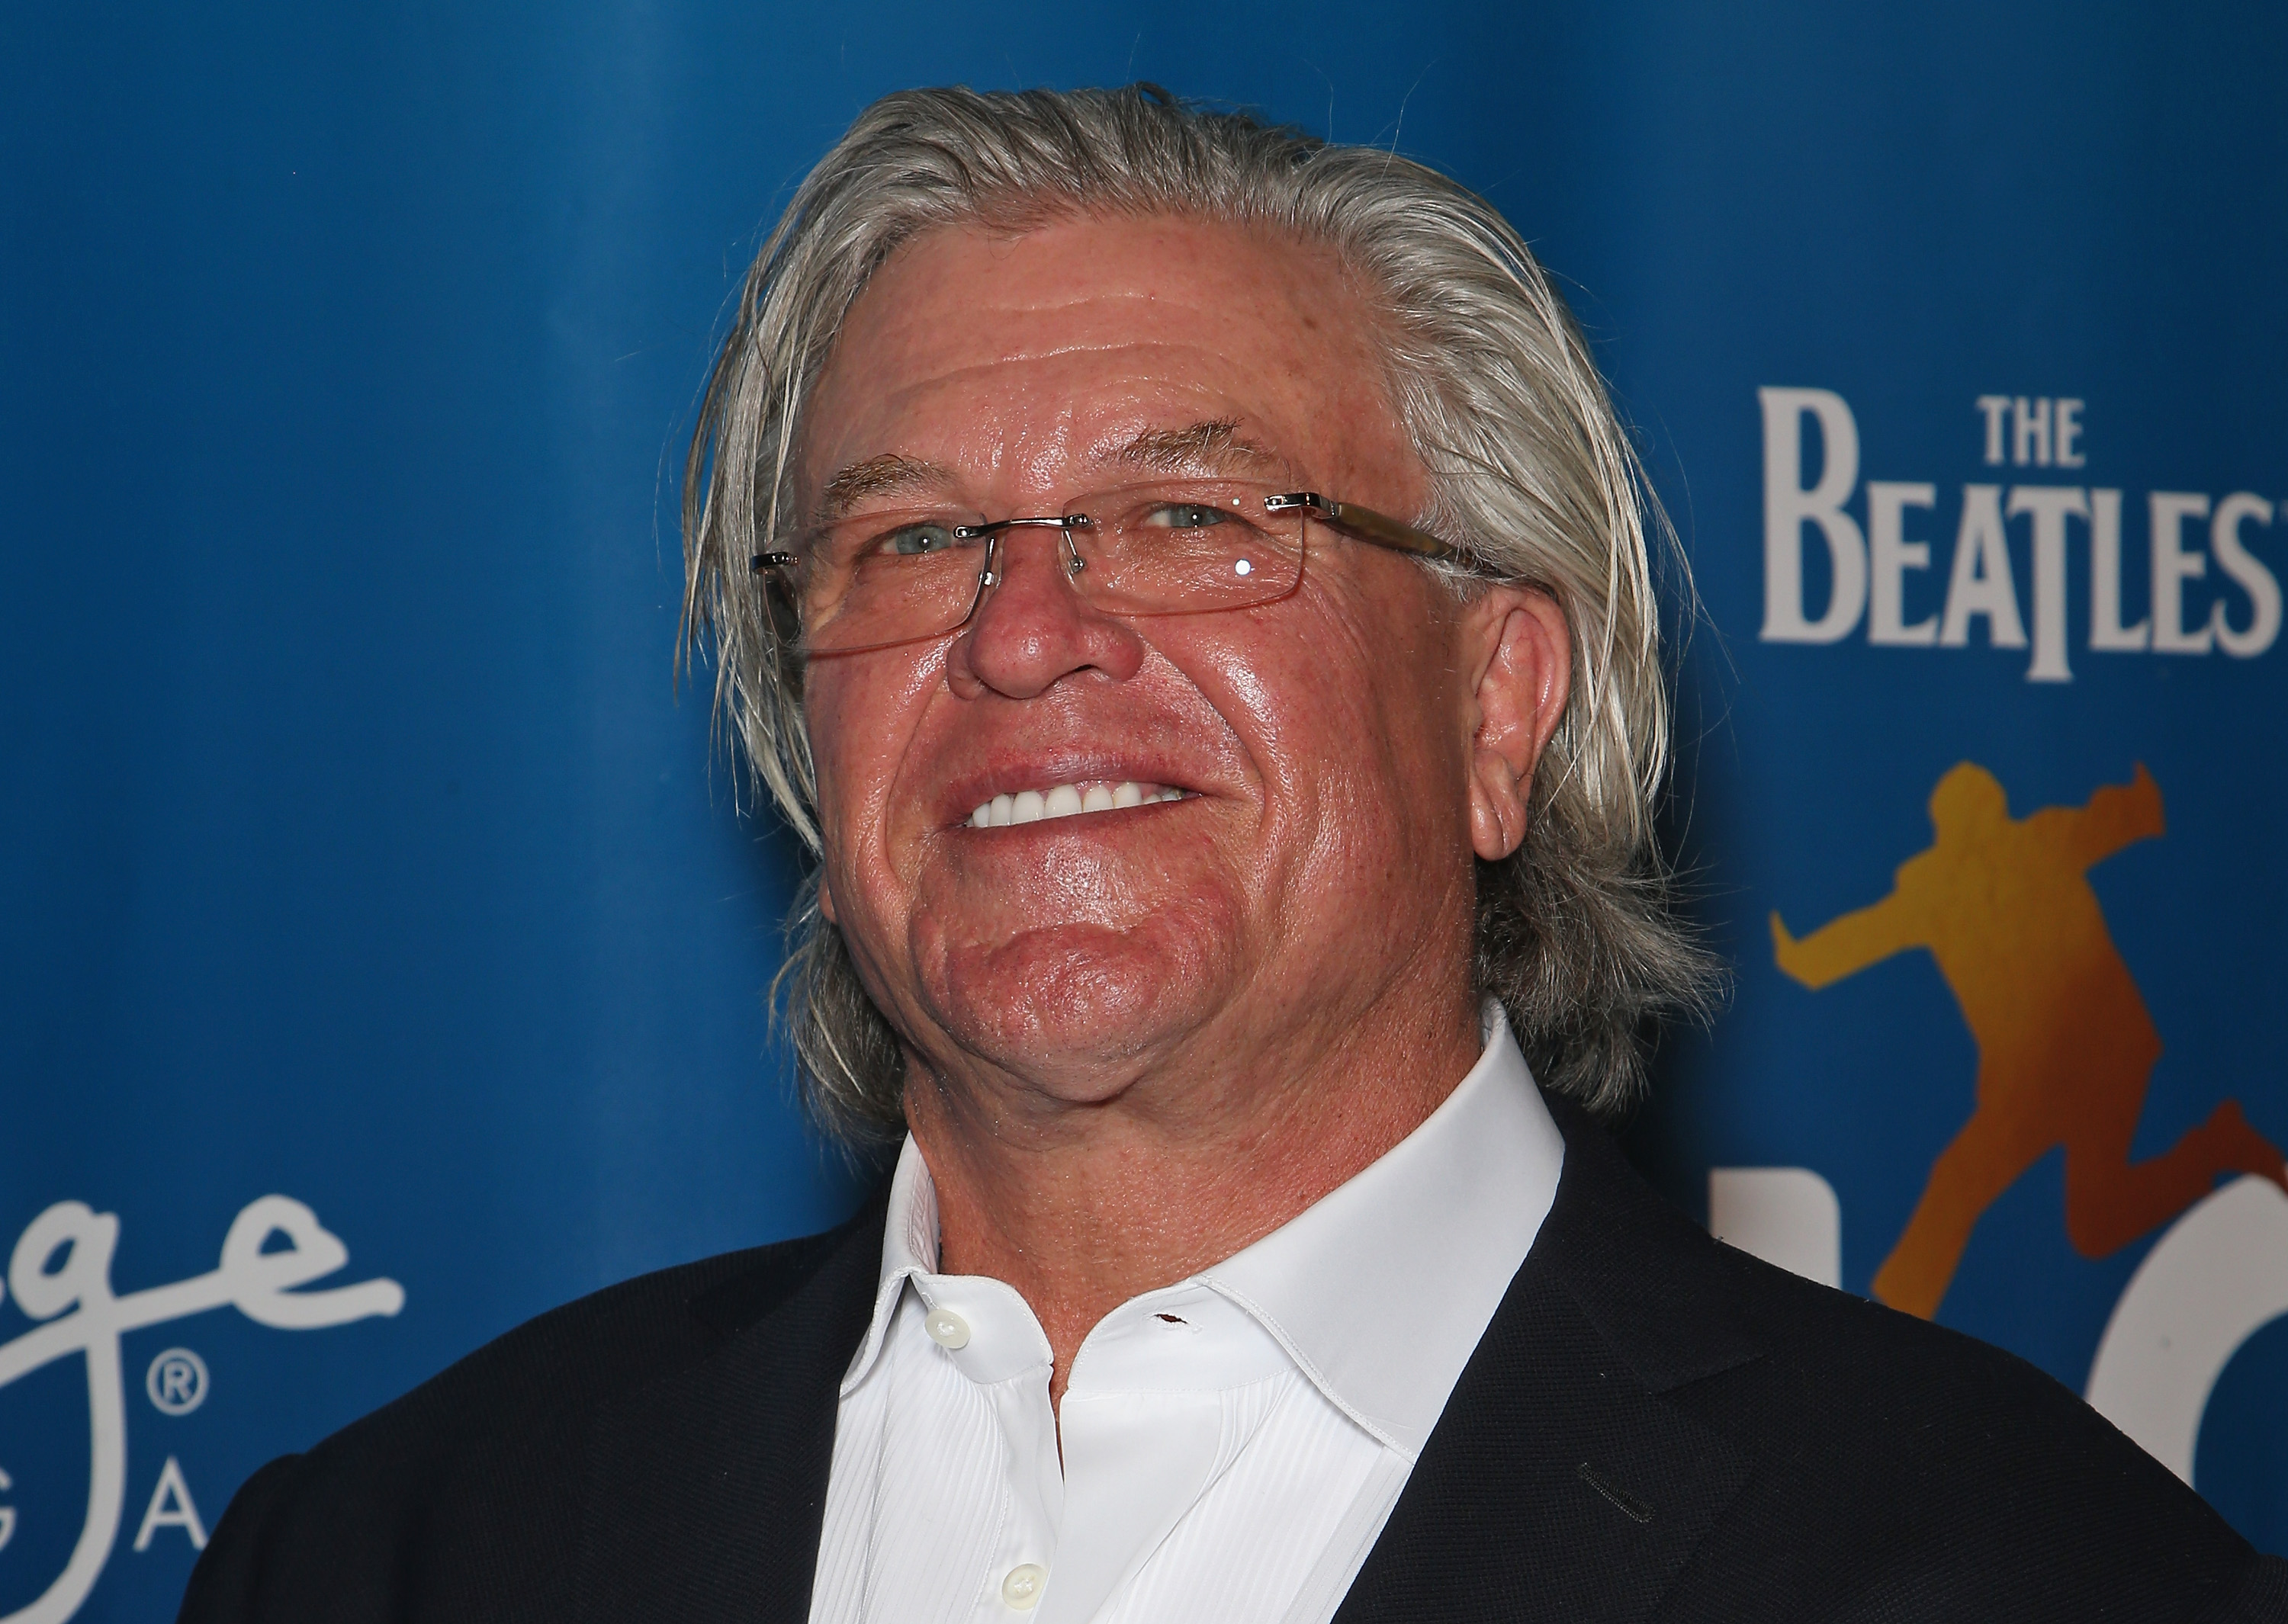 Ron White at the 10th anniversary celebration of "The Beatles LOVE by Cirque du Soleil" on July 14, 2016, in Las Vegas, Nevada. | Source: Getty Images